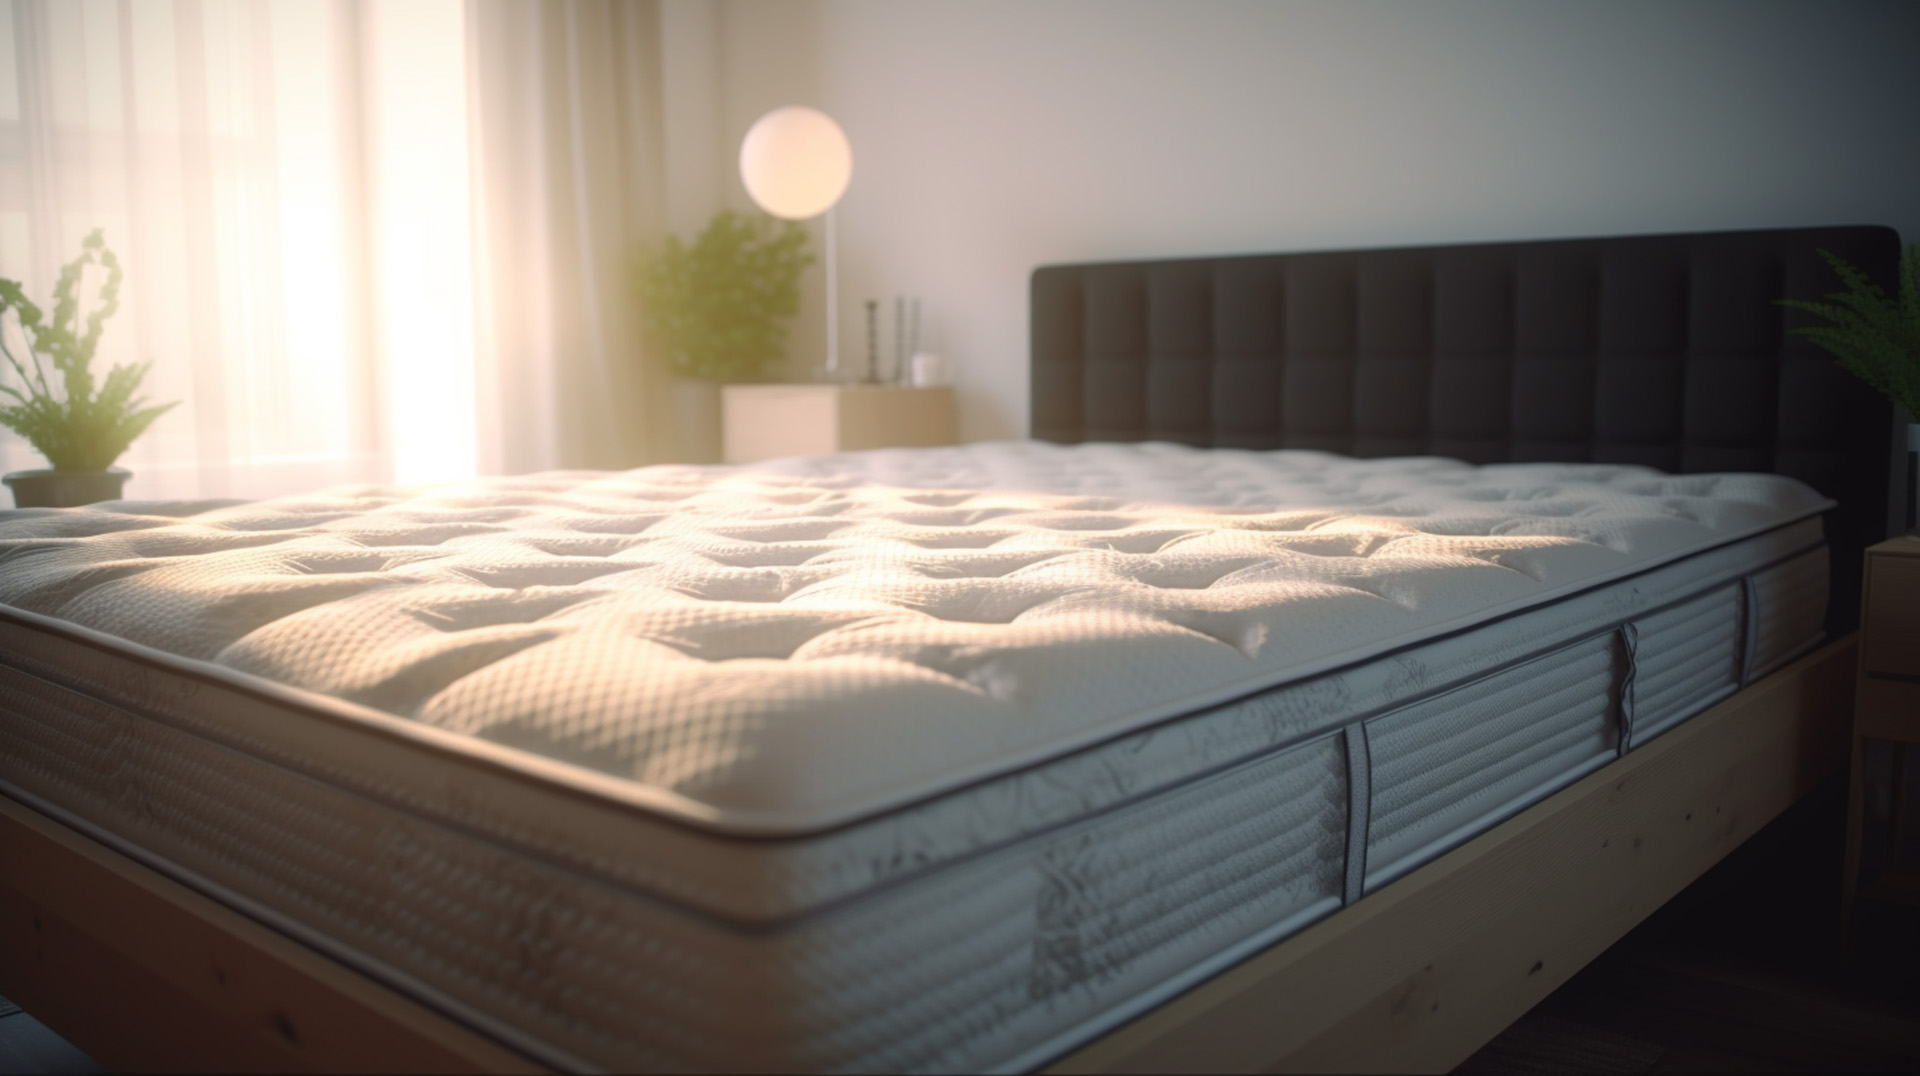 Shop Organic Mattresses and Beds in Woonsocket, RI